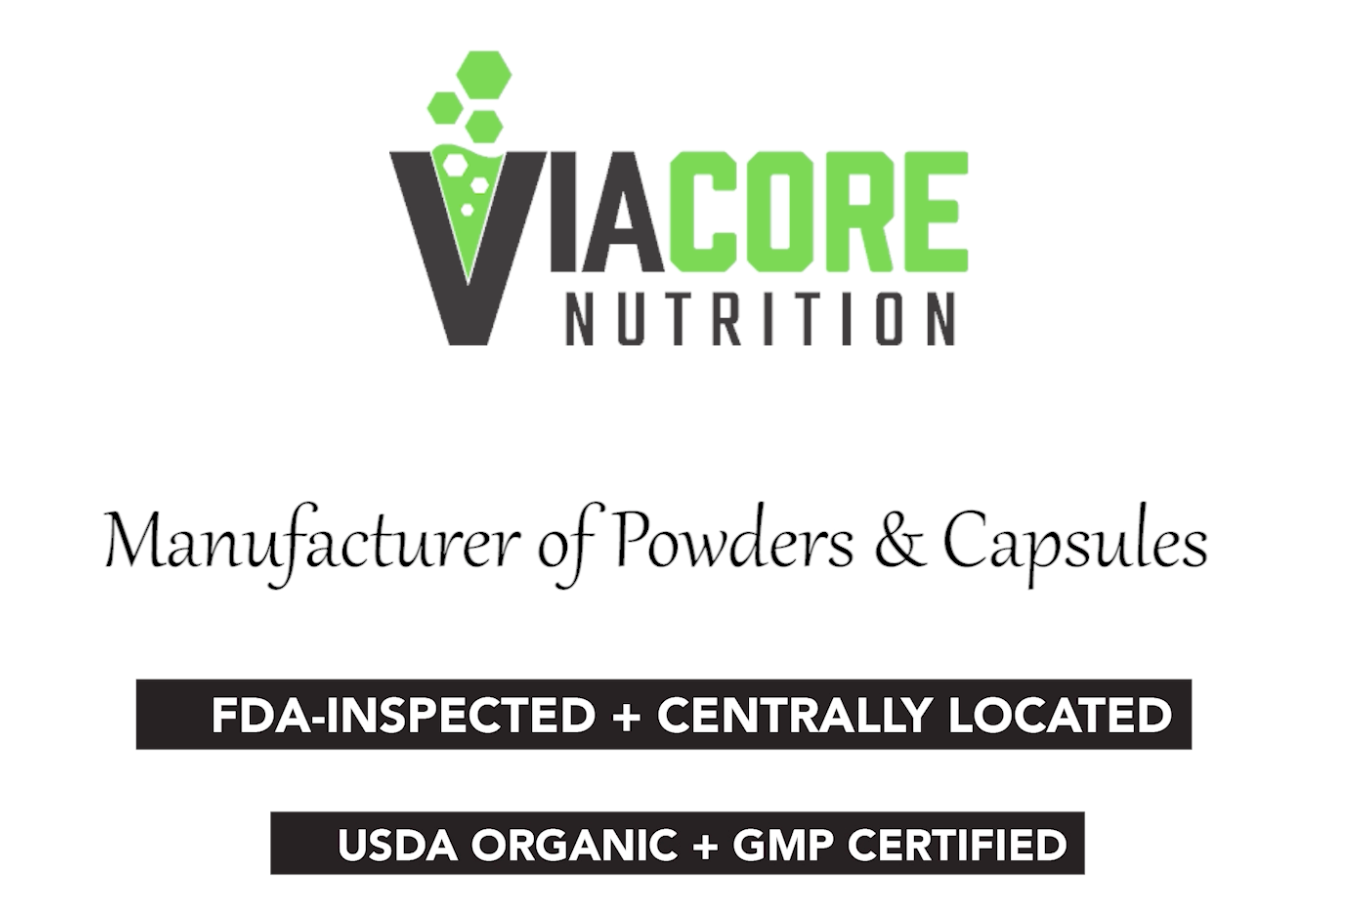 Load video: Behind the Scenes at ViaCore Nutrition